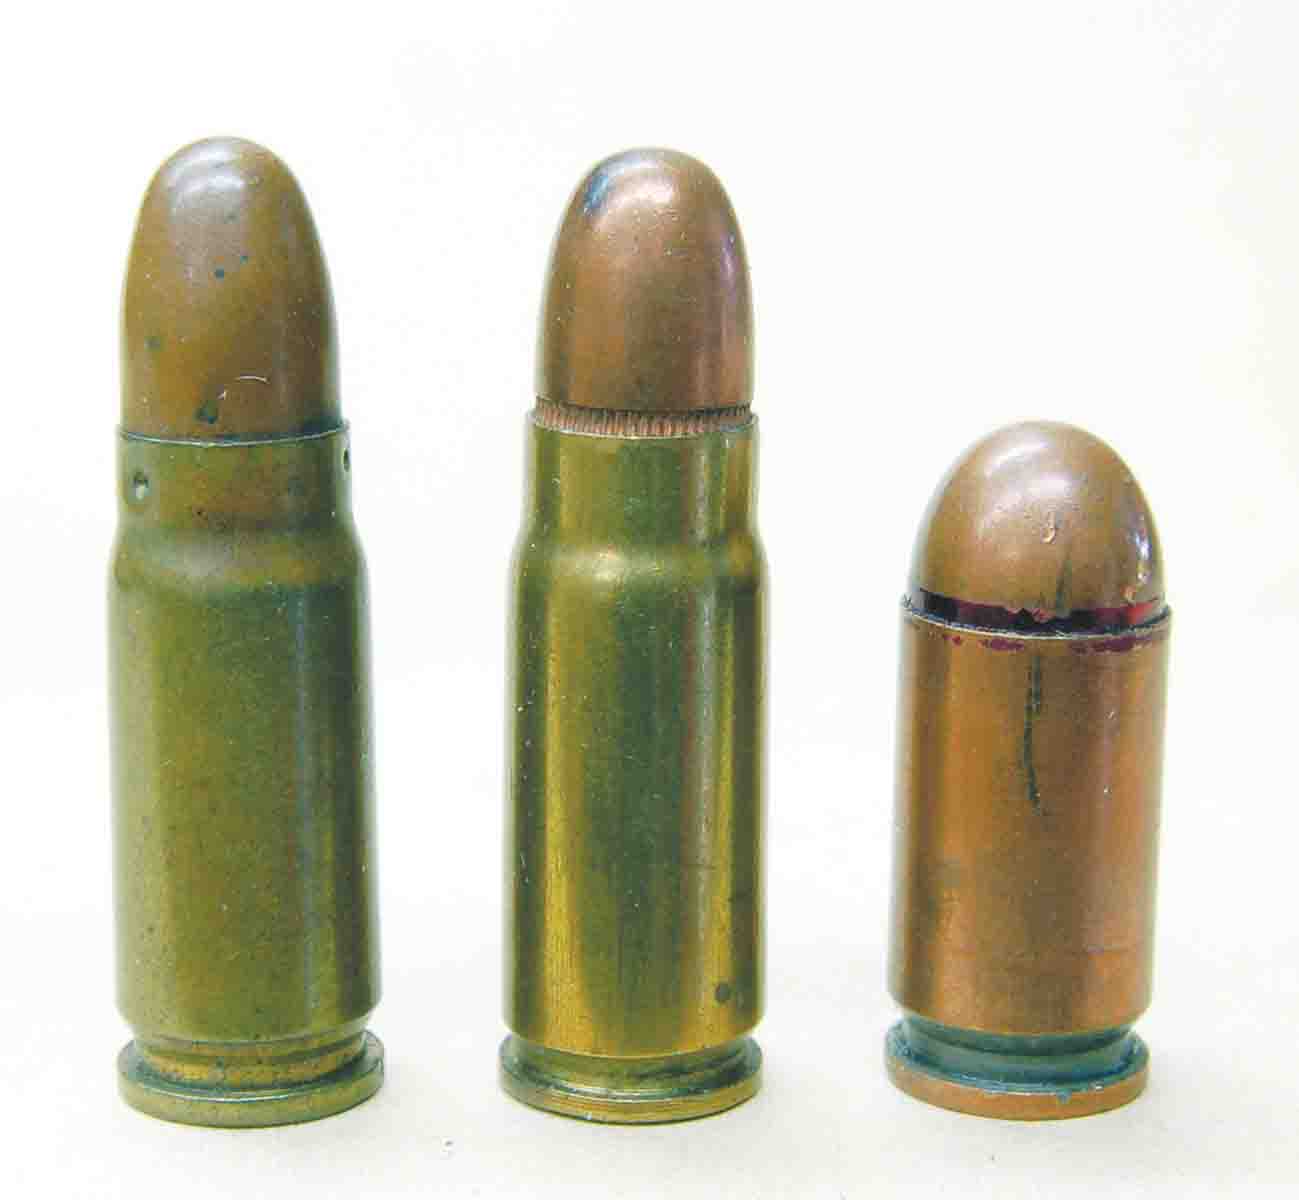 Left to right: The 7.62mm Russian Tokarev cartridge of 1930, the 7.63mm Mauser Tokarev of 1896 and the 9x18 Makarov.